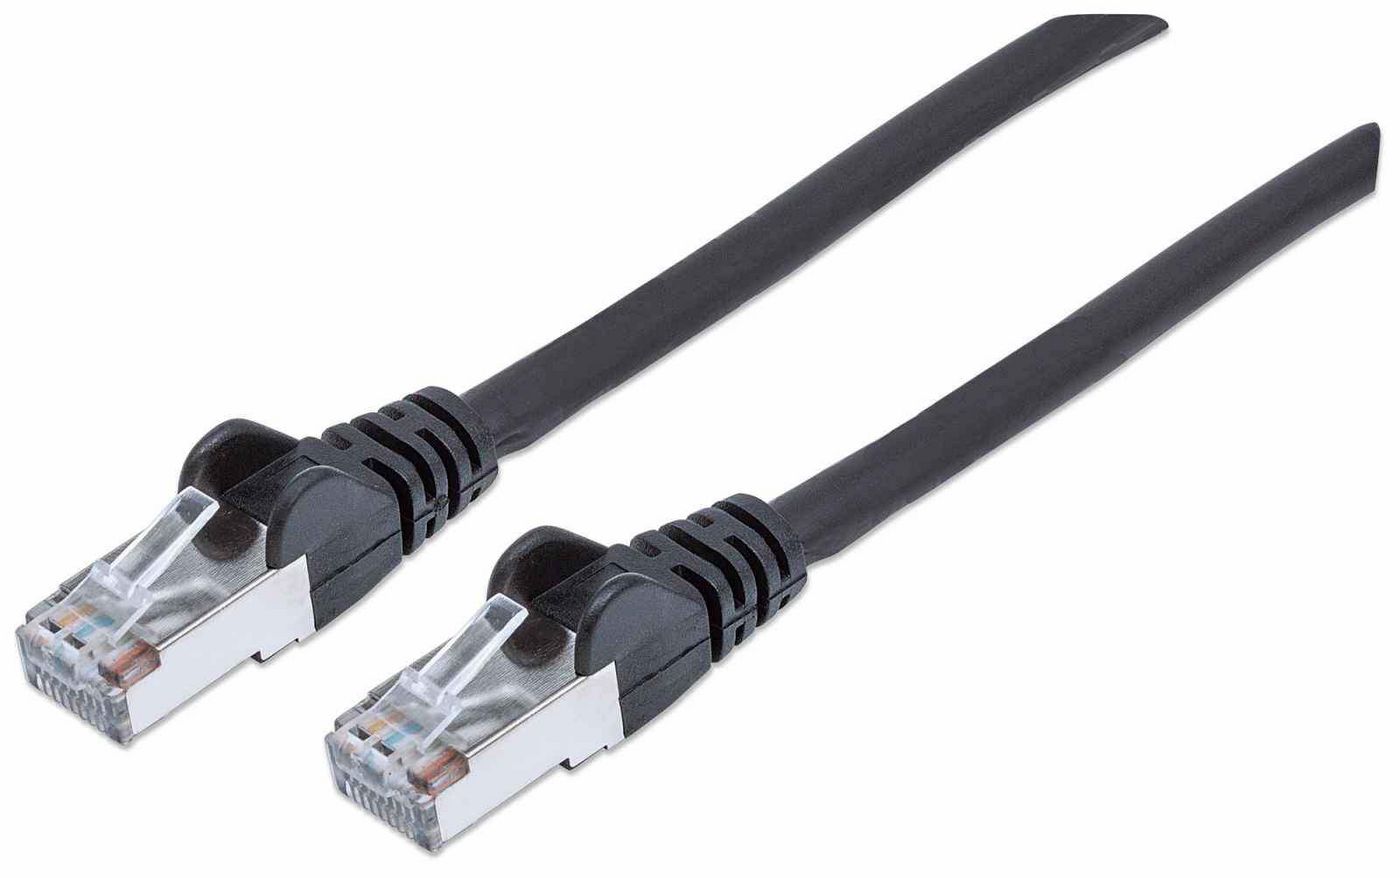 Intellinet 740623 High Performance Network Cable 